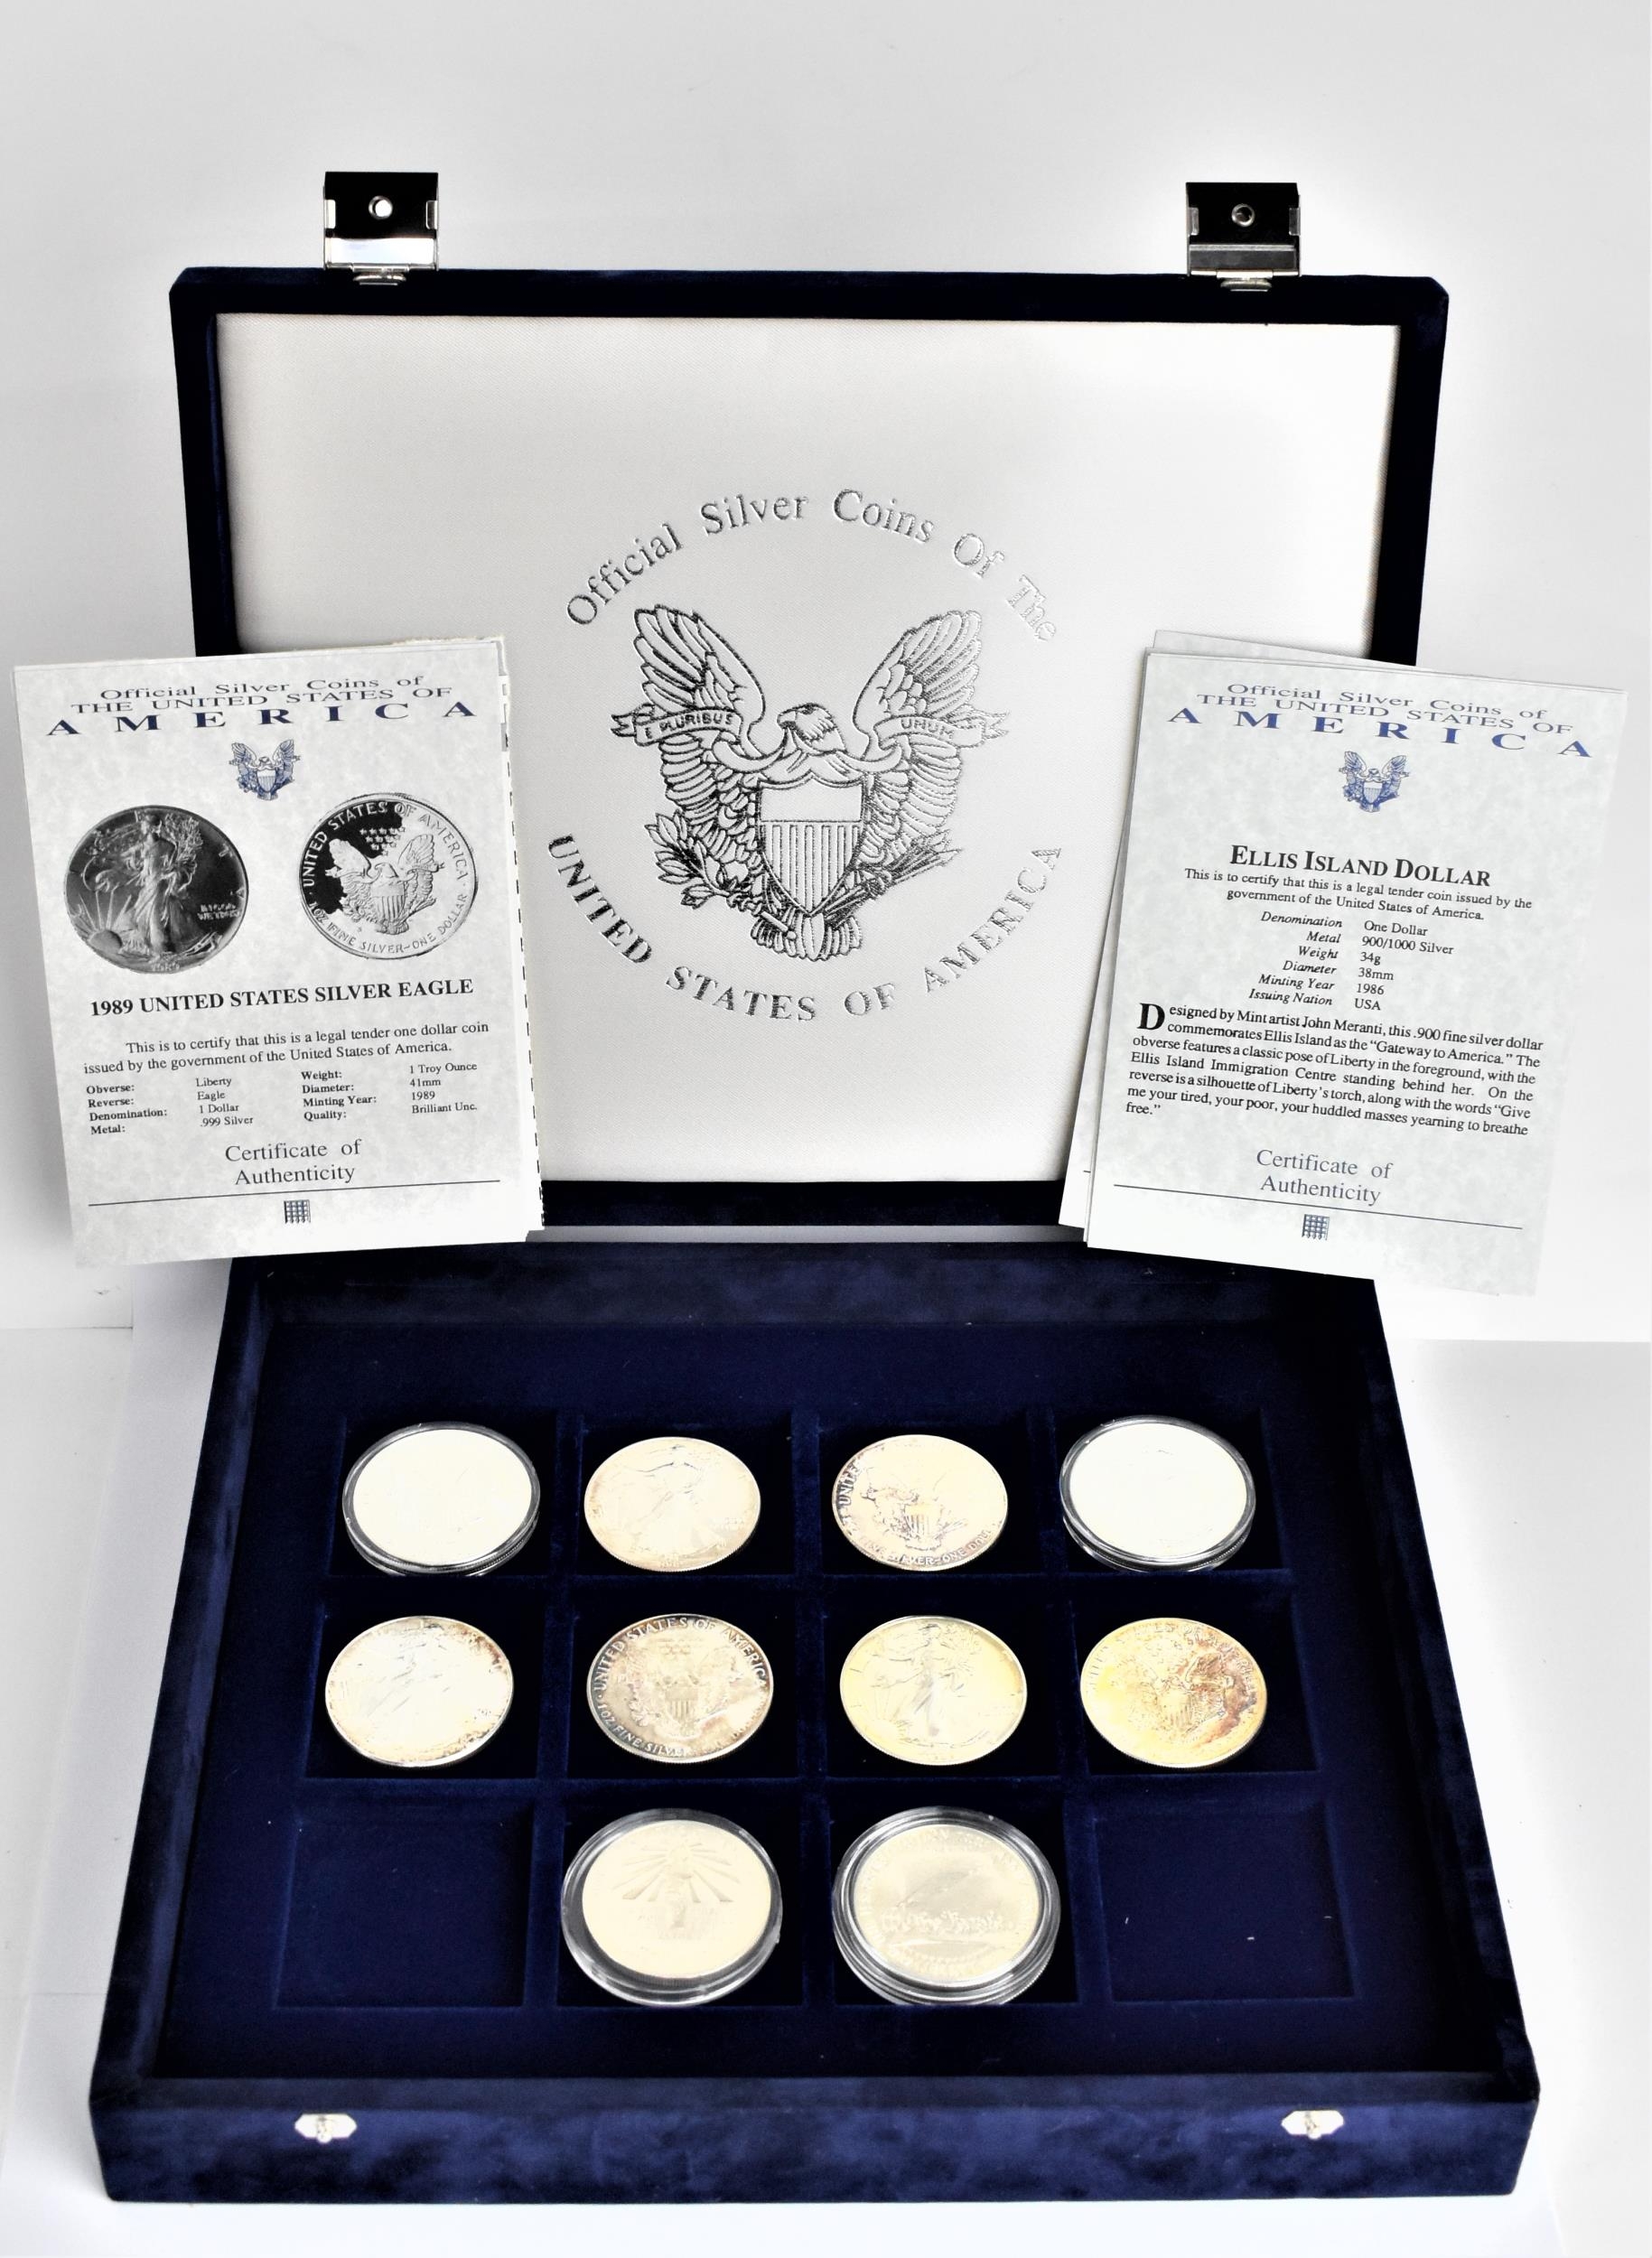 Official Silver Coins of The United States of America' part of the Royal Mint collection, eight ' - Image 10 of 10